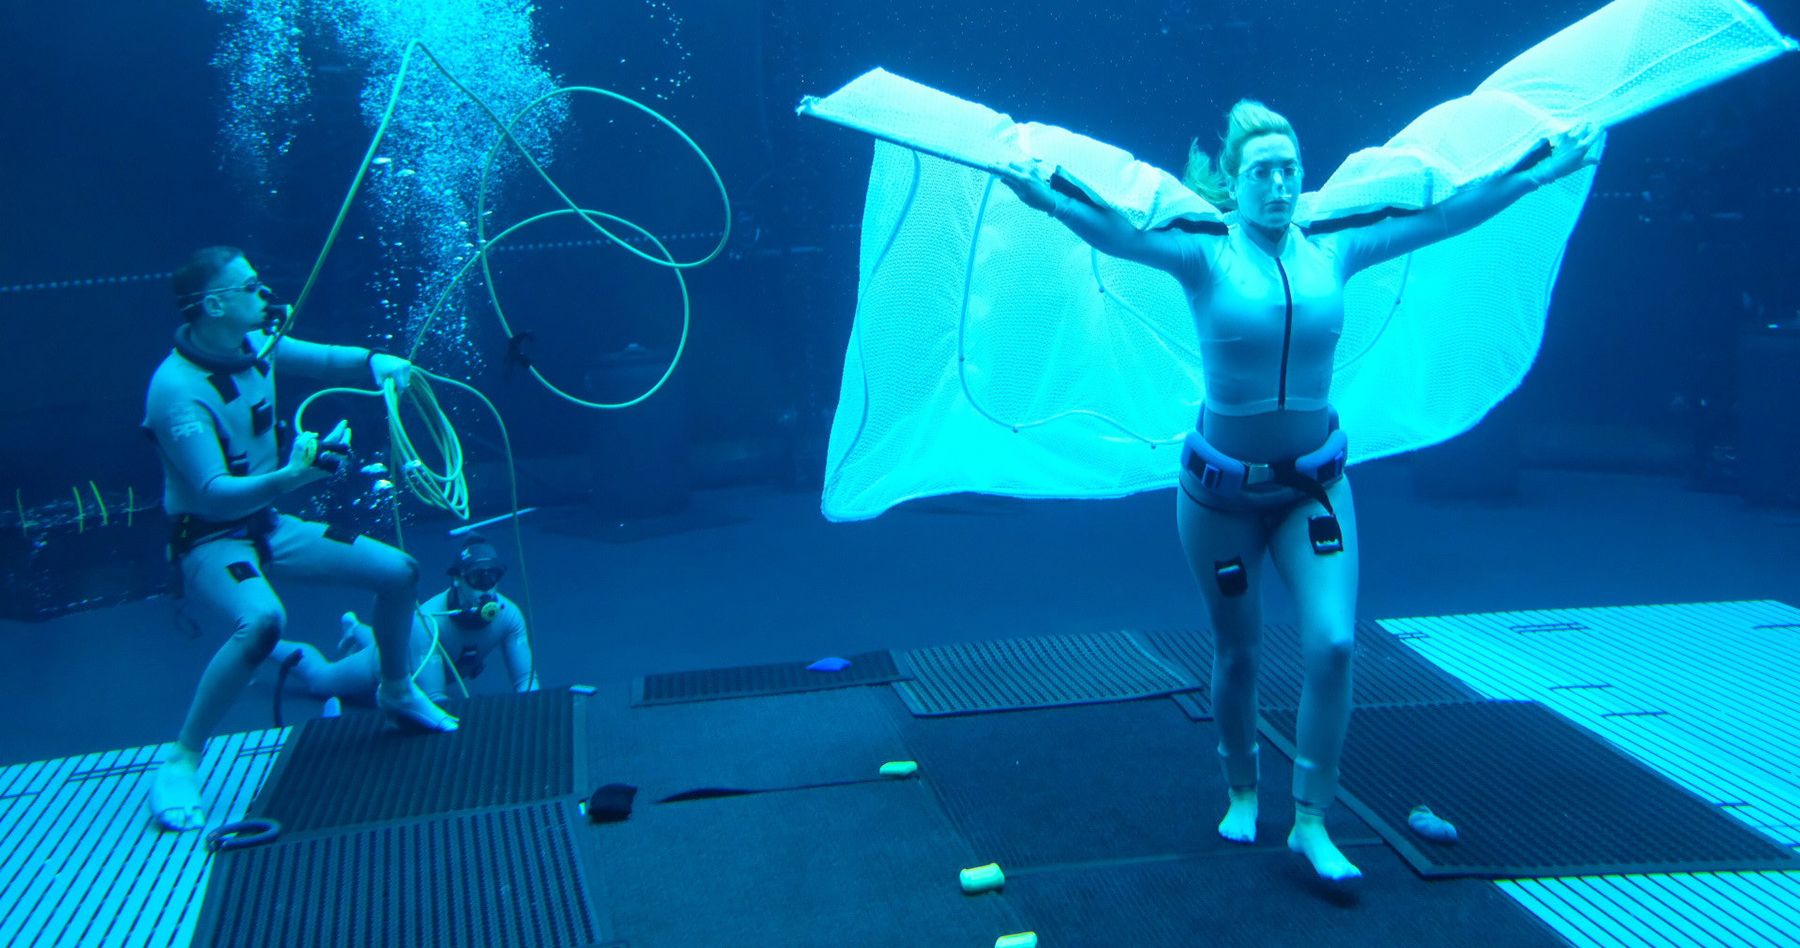 New Avatar 2 Set Image Goes Underwater with Kate Winslet as Ronal